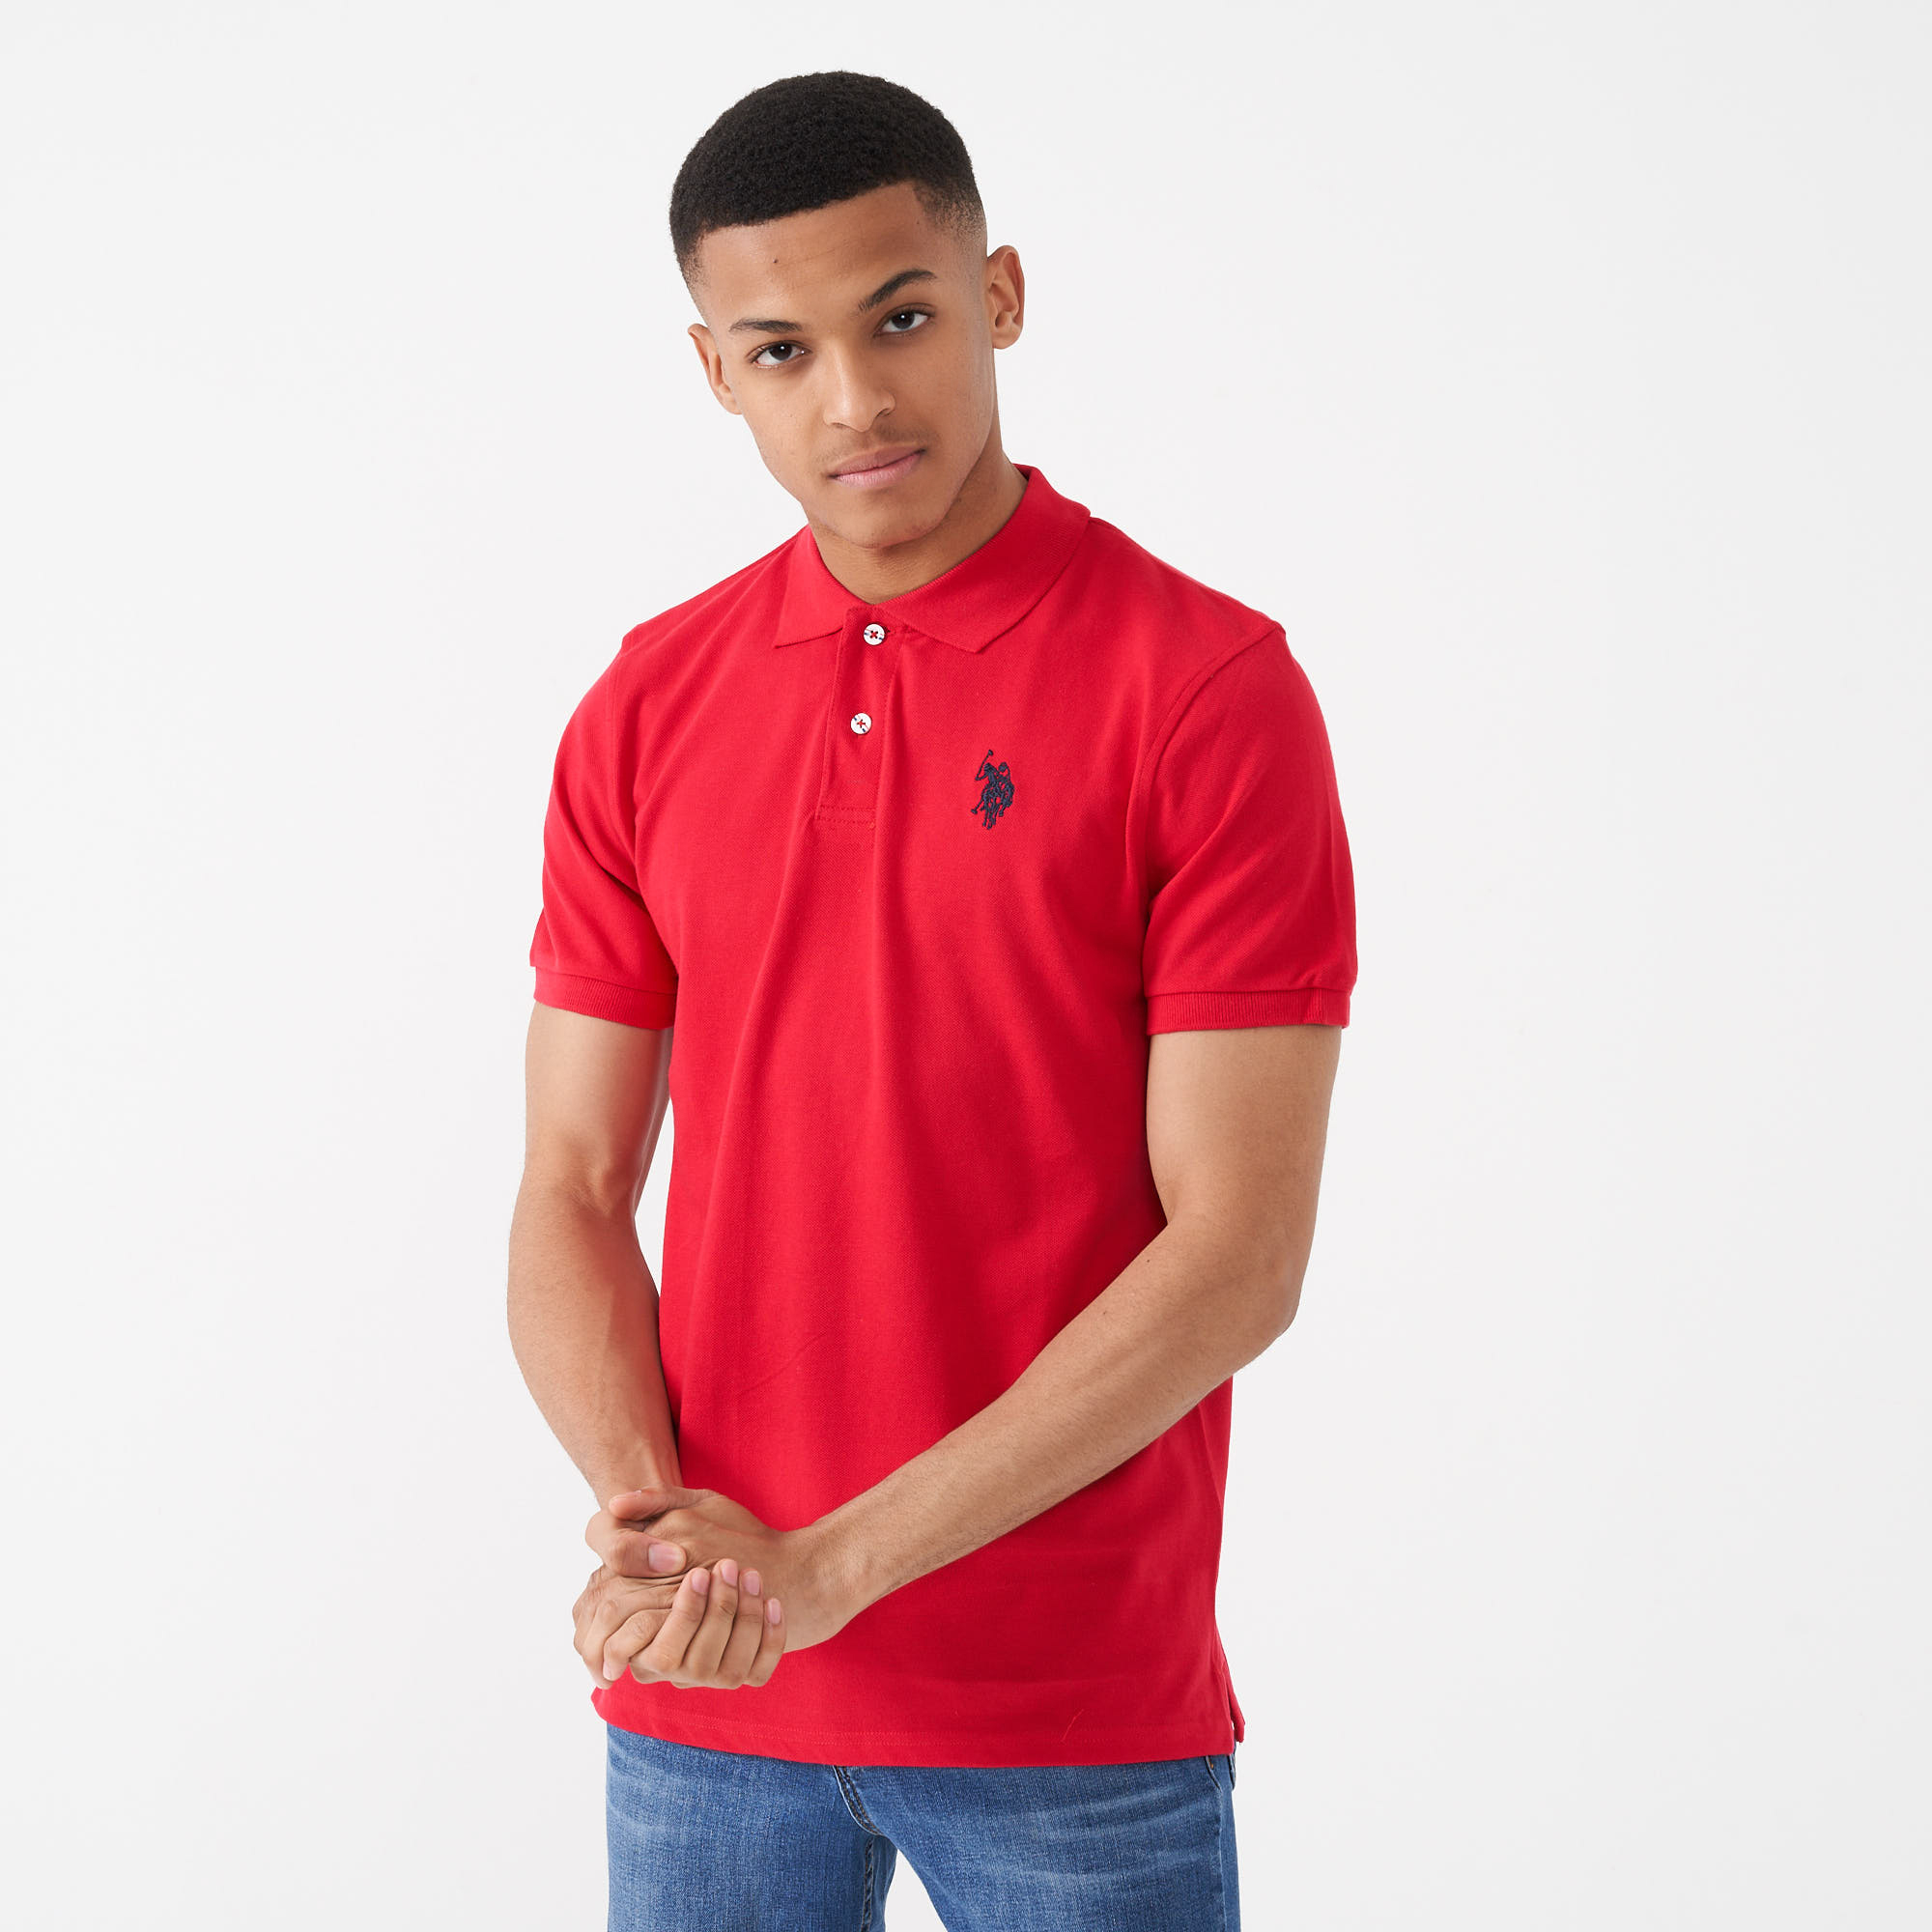 34% off on Men's Classic Red Golf Shirt | OneDayOnly